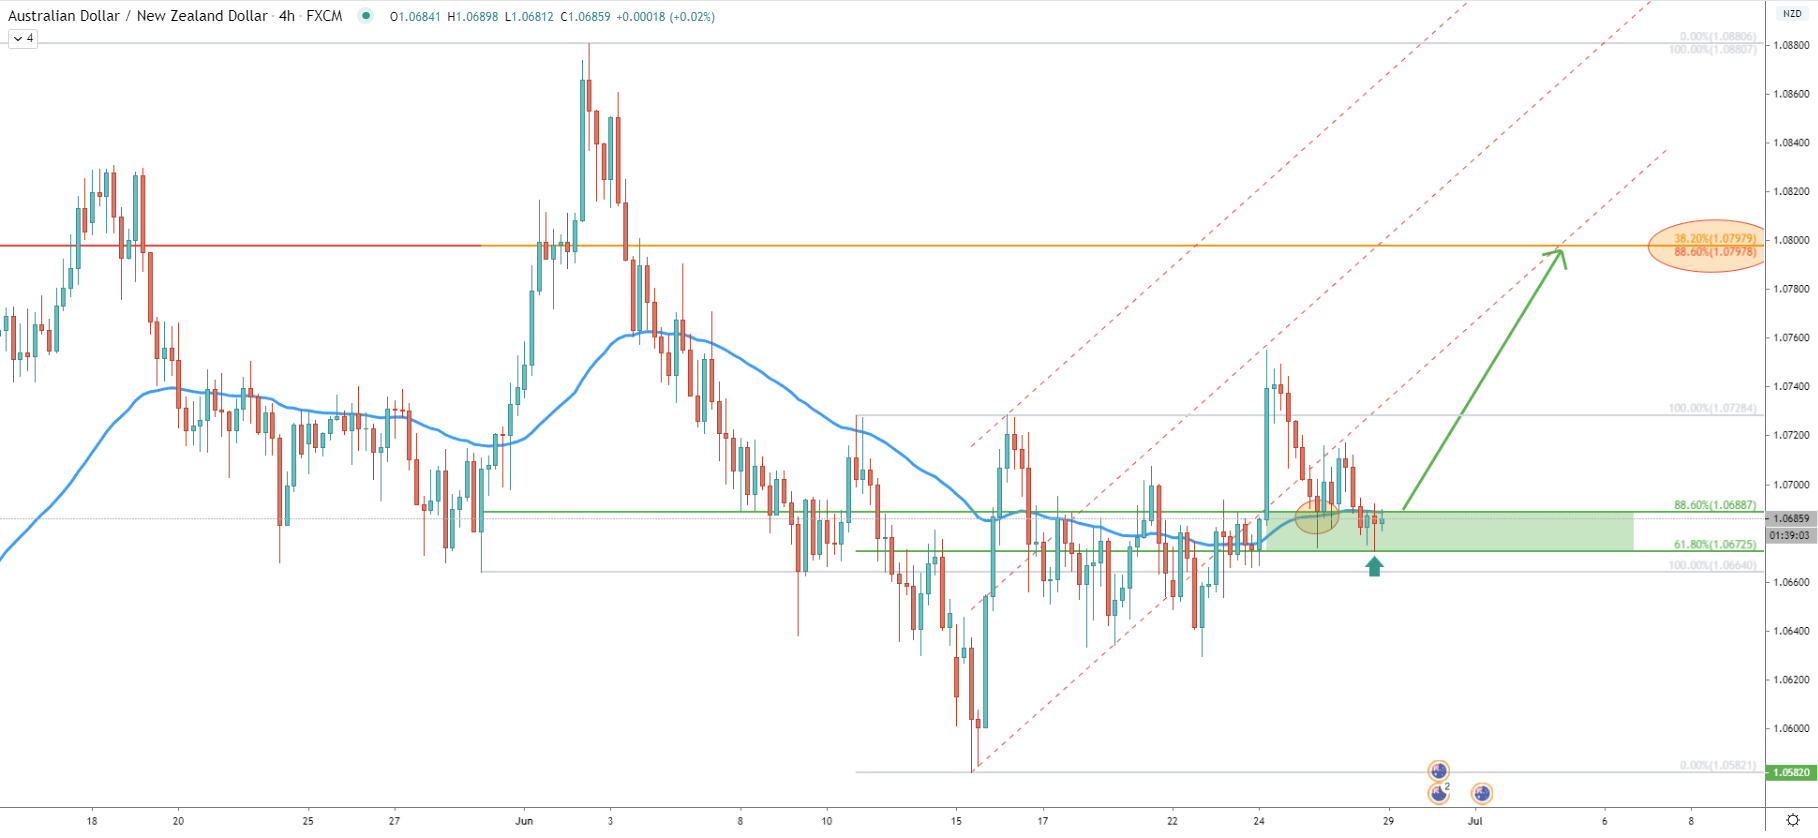 AUD/NZD 4-Hour Technical Analysis 26 June 2020